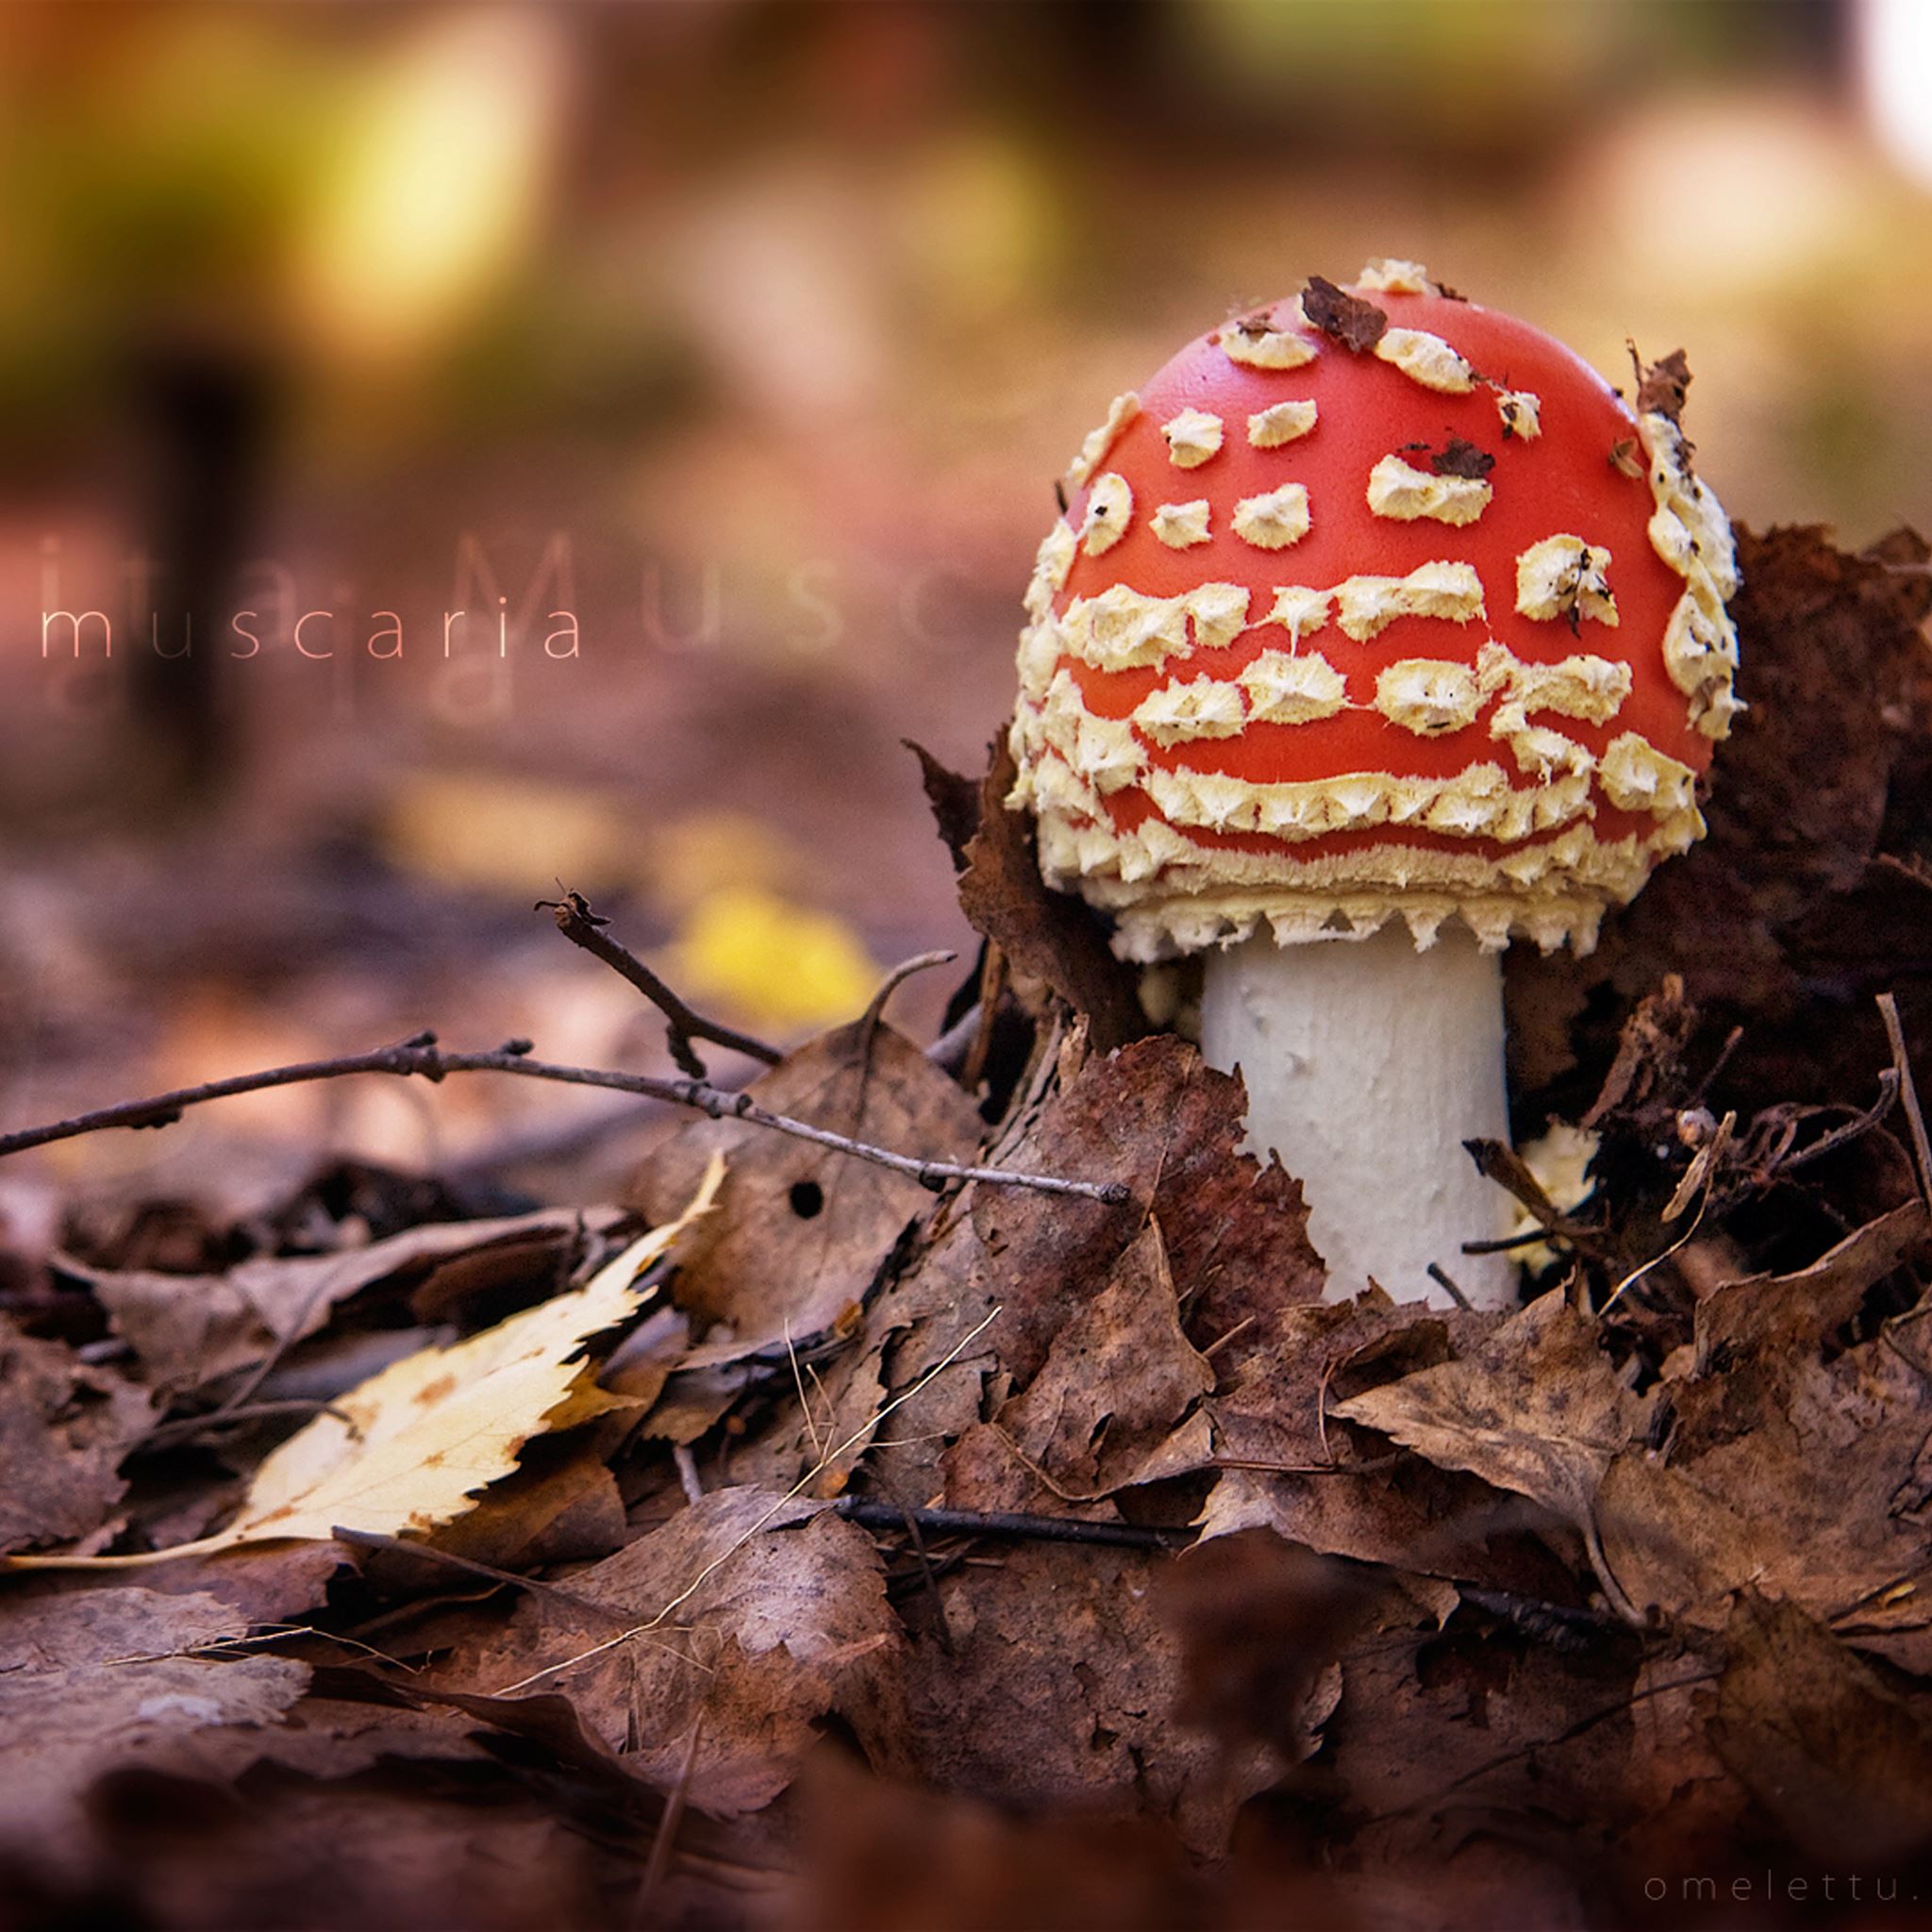 Forest Wither Mushroom iPad Air wallpaper 